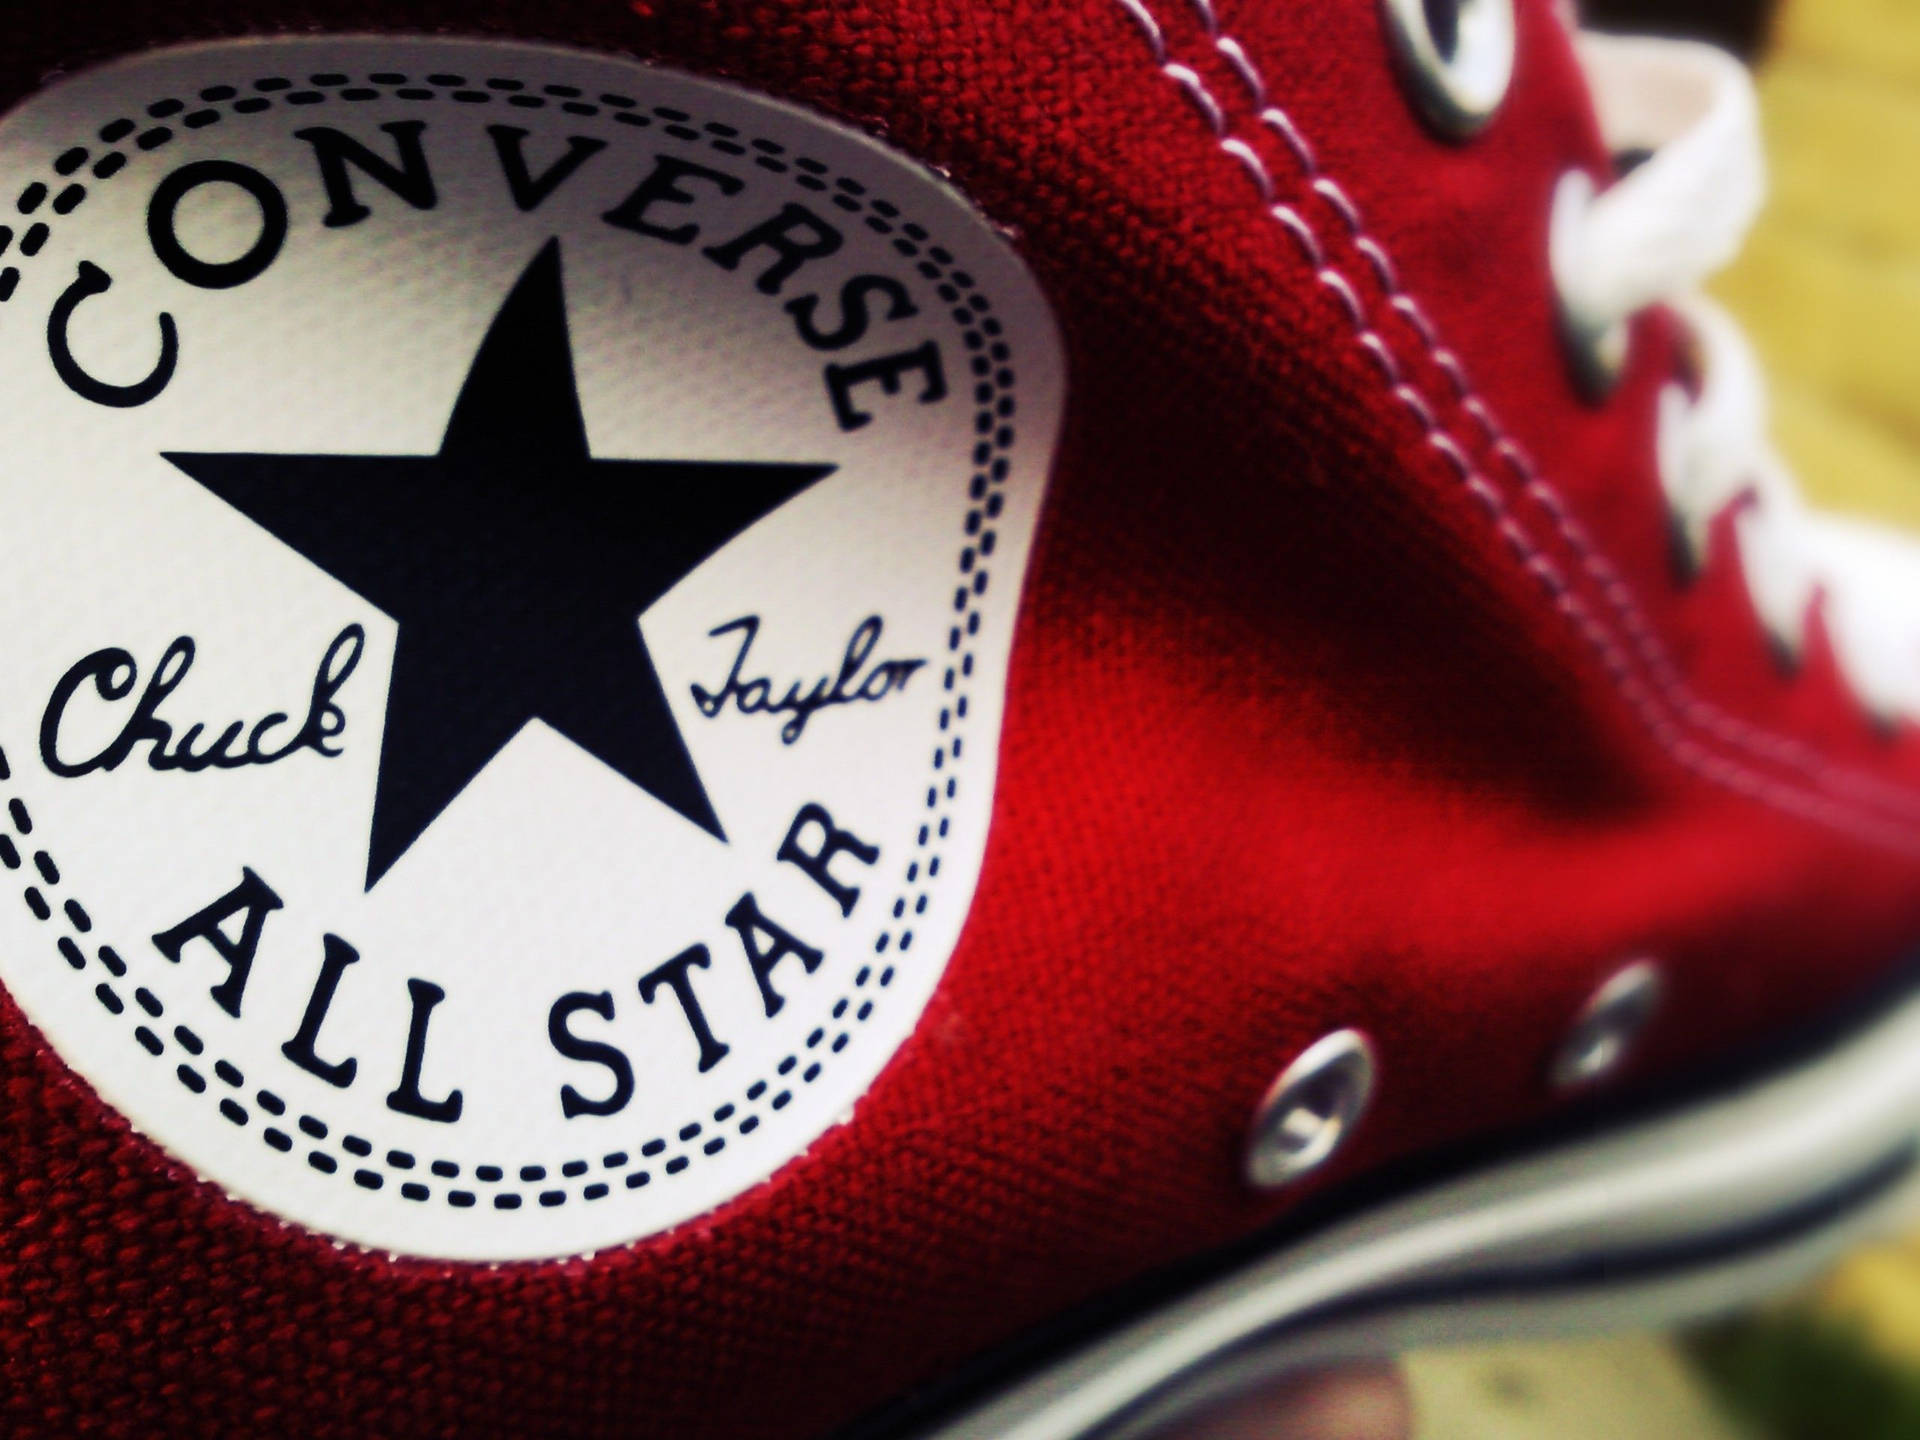 Converse 2560X1920 Wallpaper and Background Image